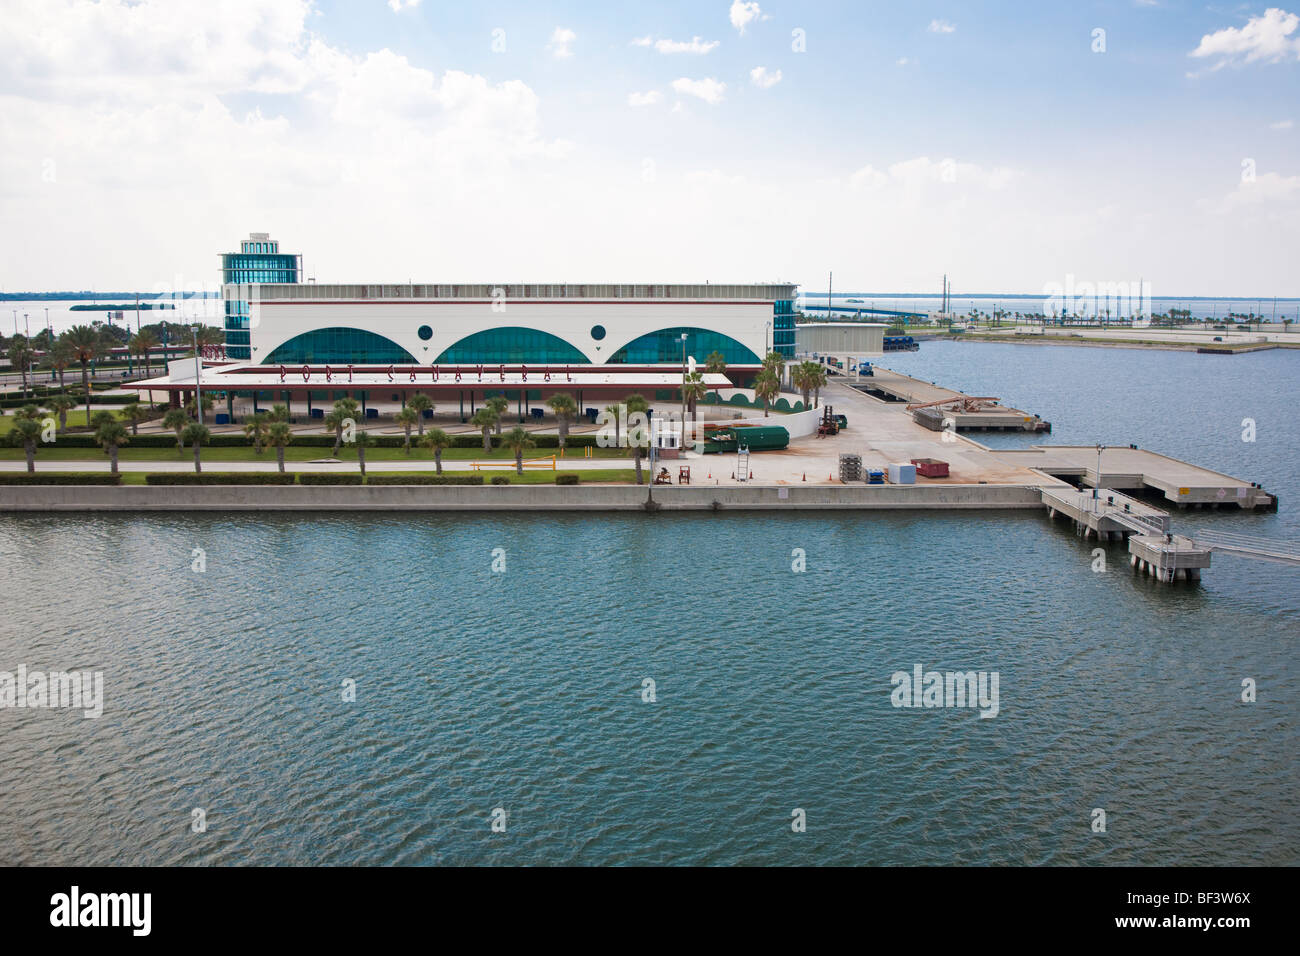 Cape Canaveral, FL, USA - August 2008 - Cruise ship terminal at Cape Canaveral, Florida Stock Photo